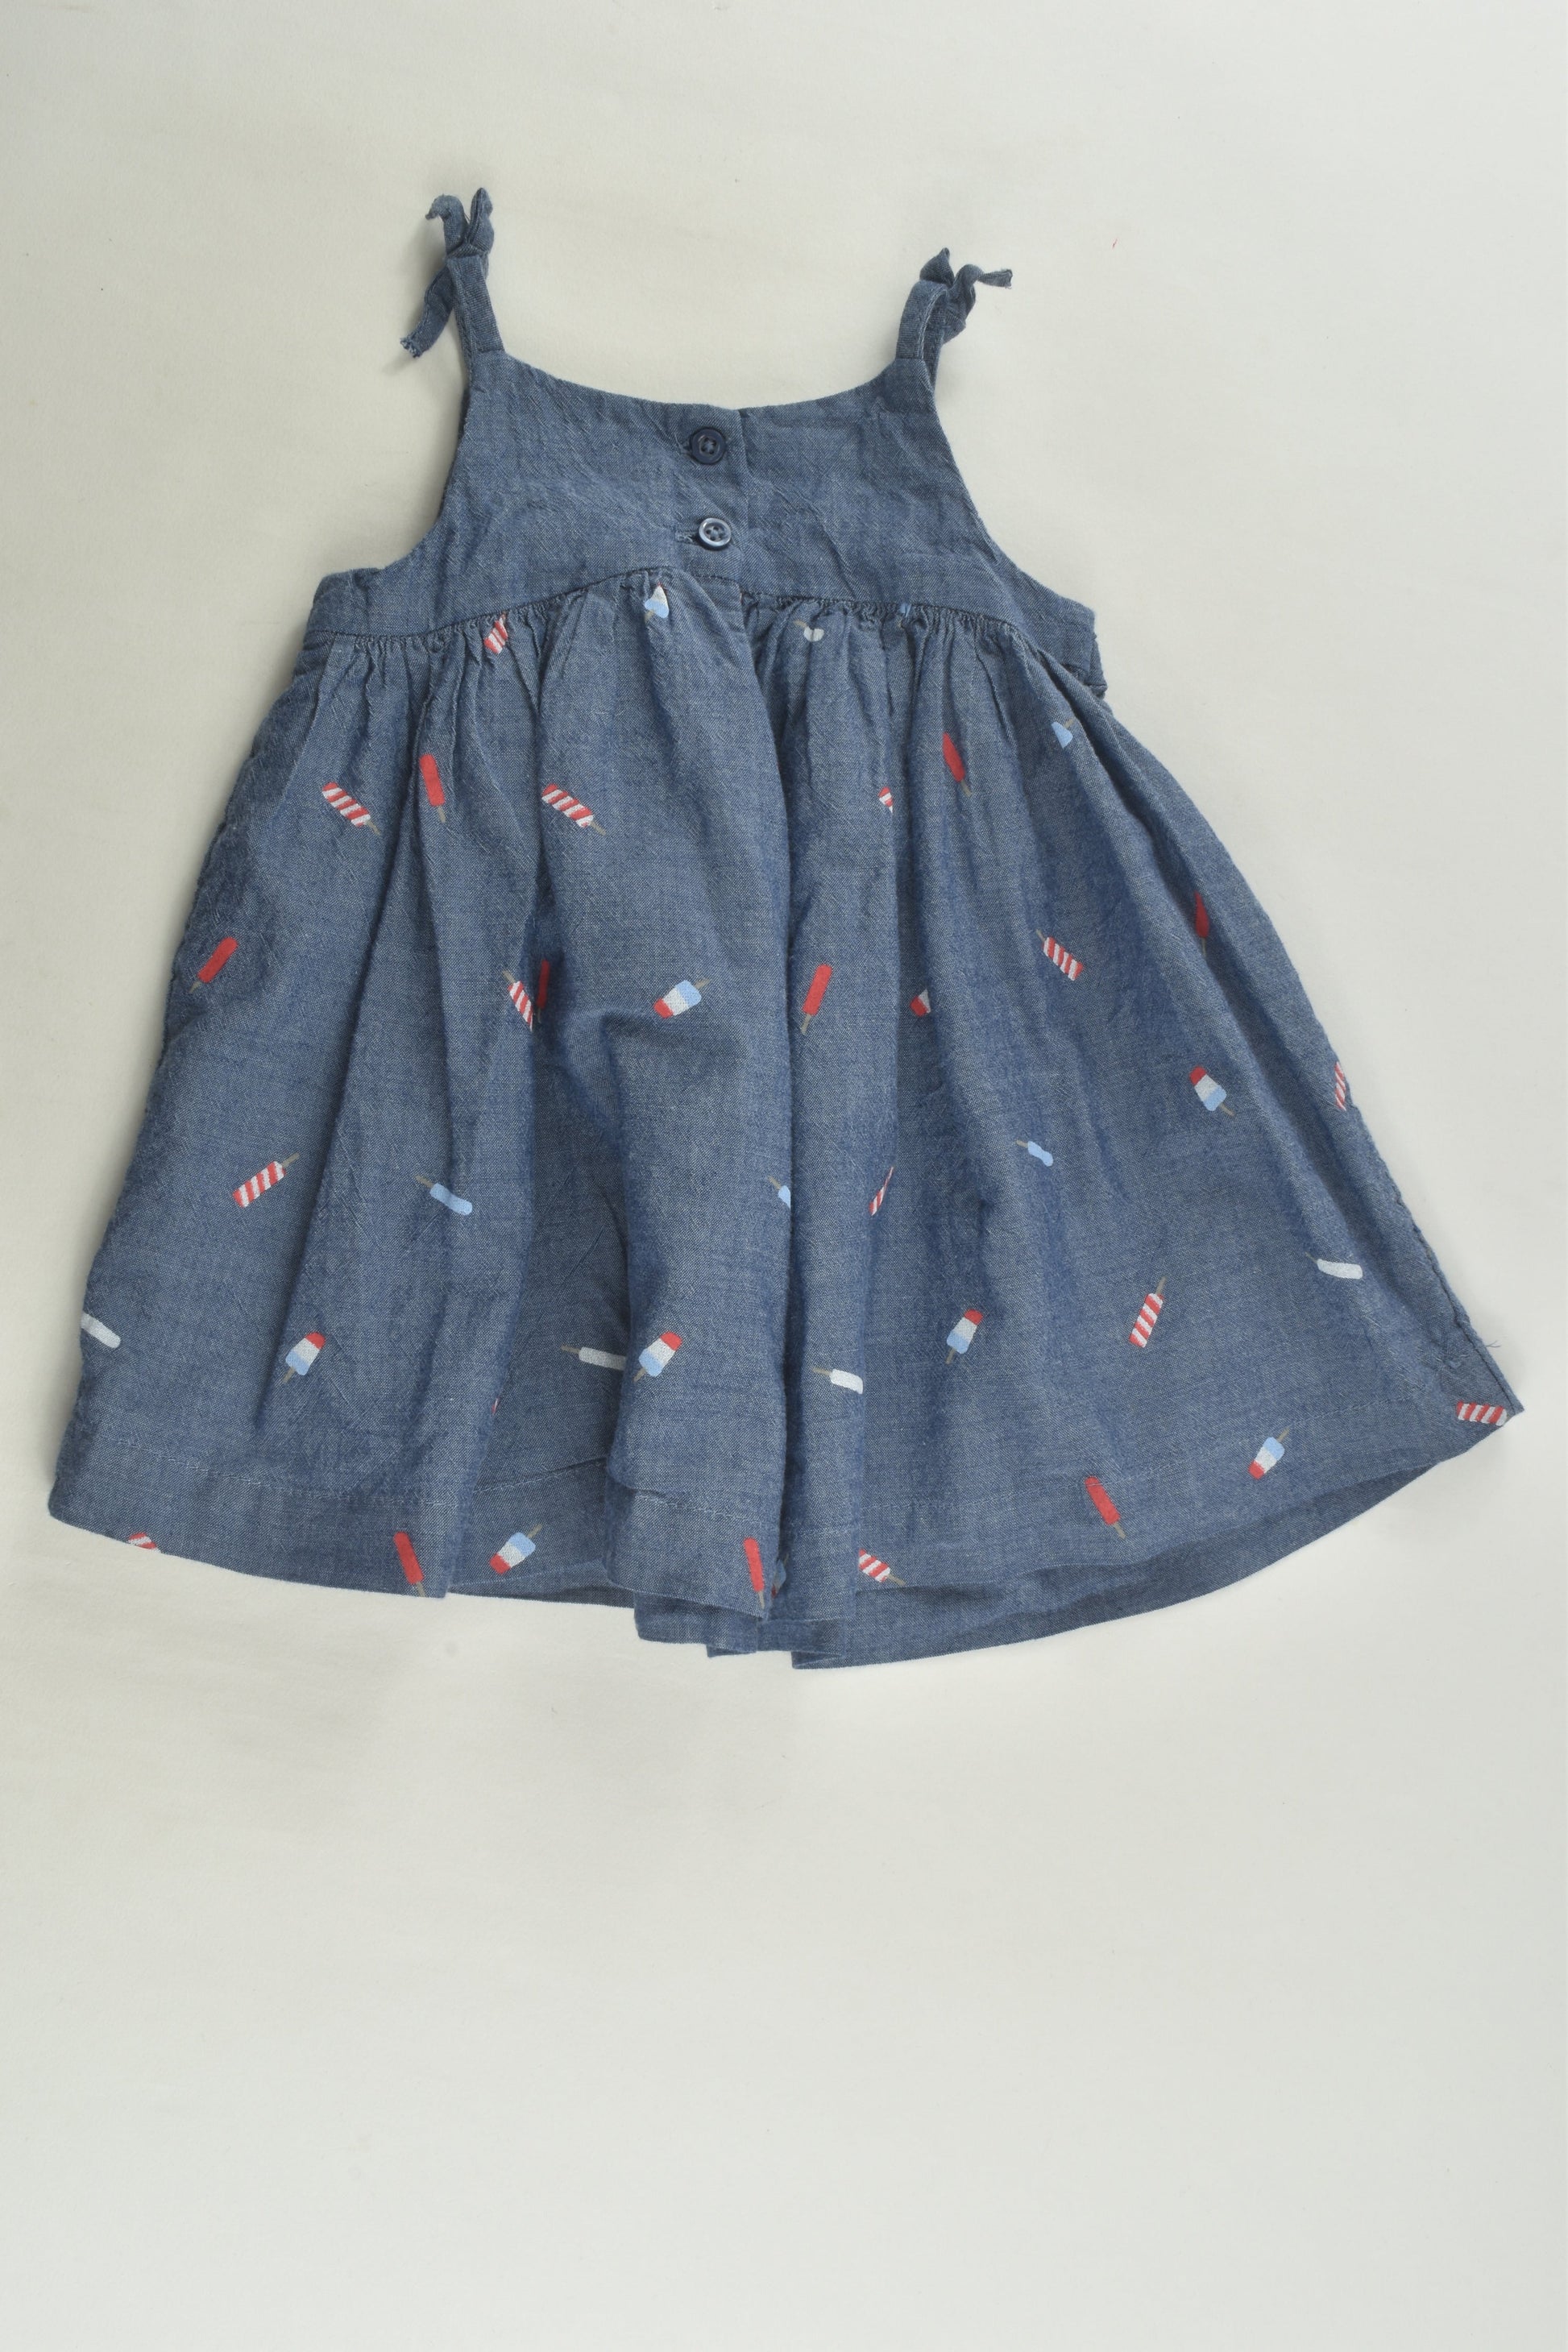 Baby Gap Size 00 Lined Dress